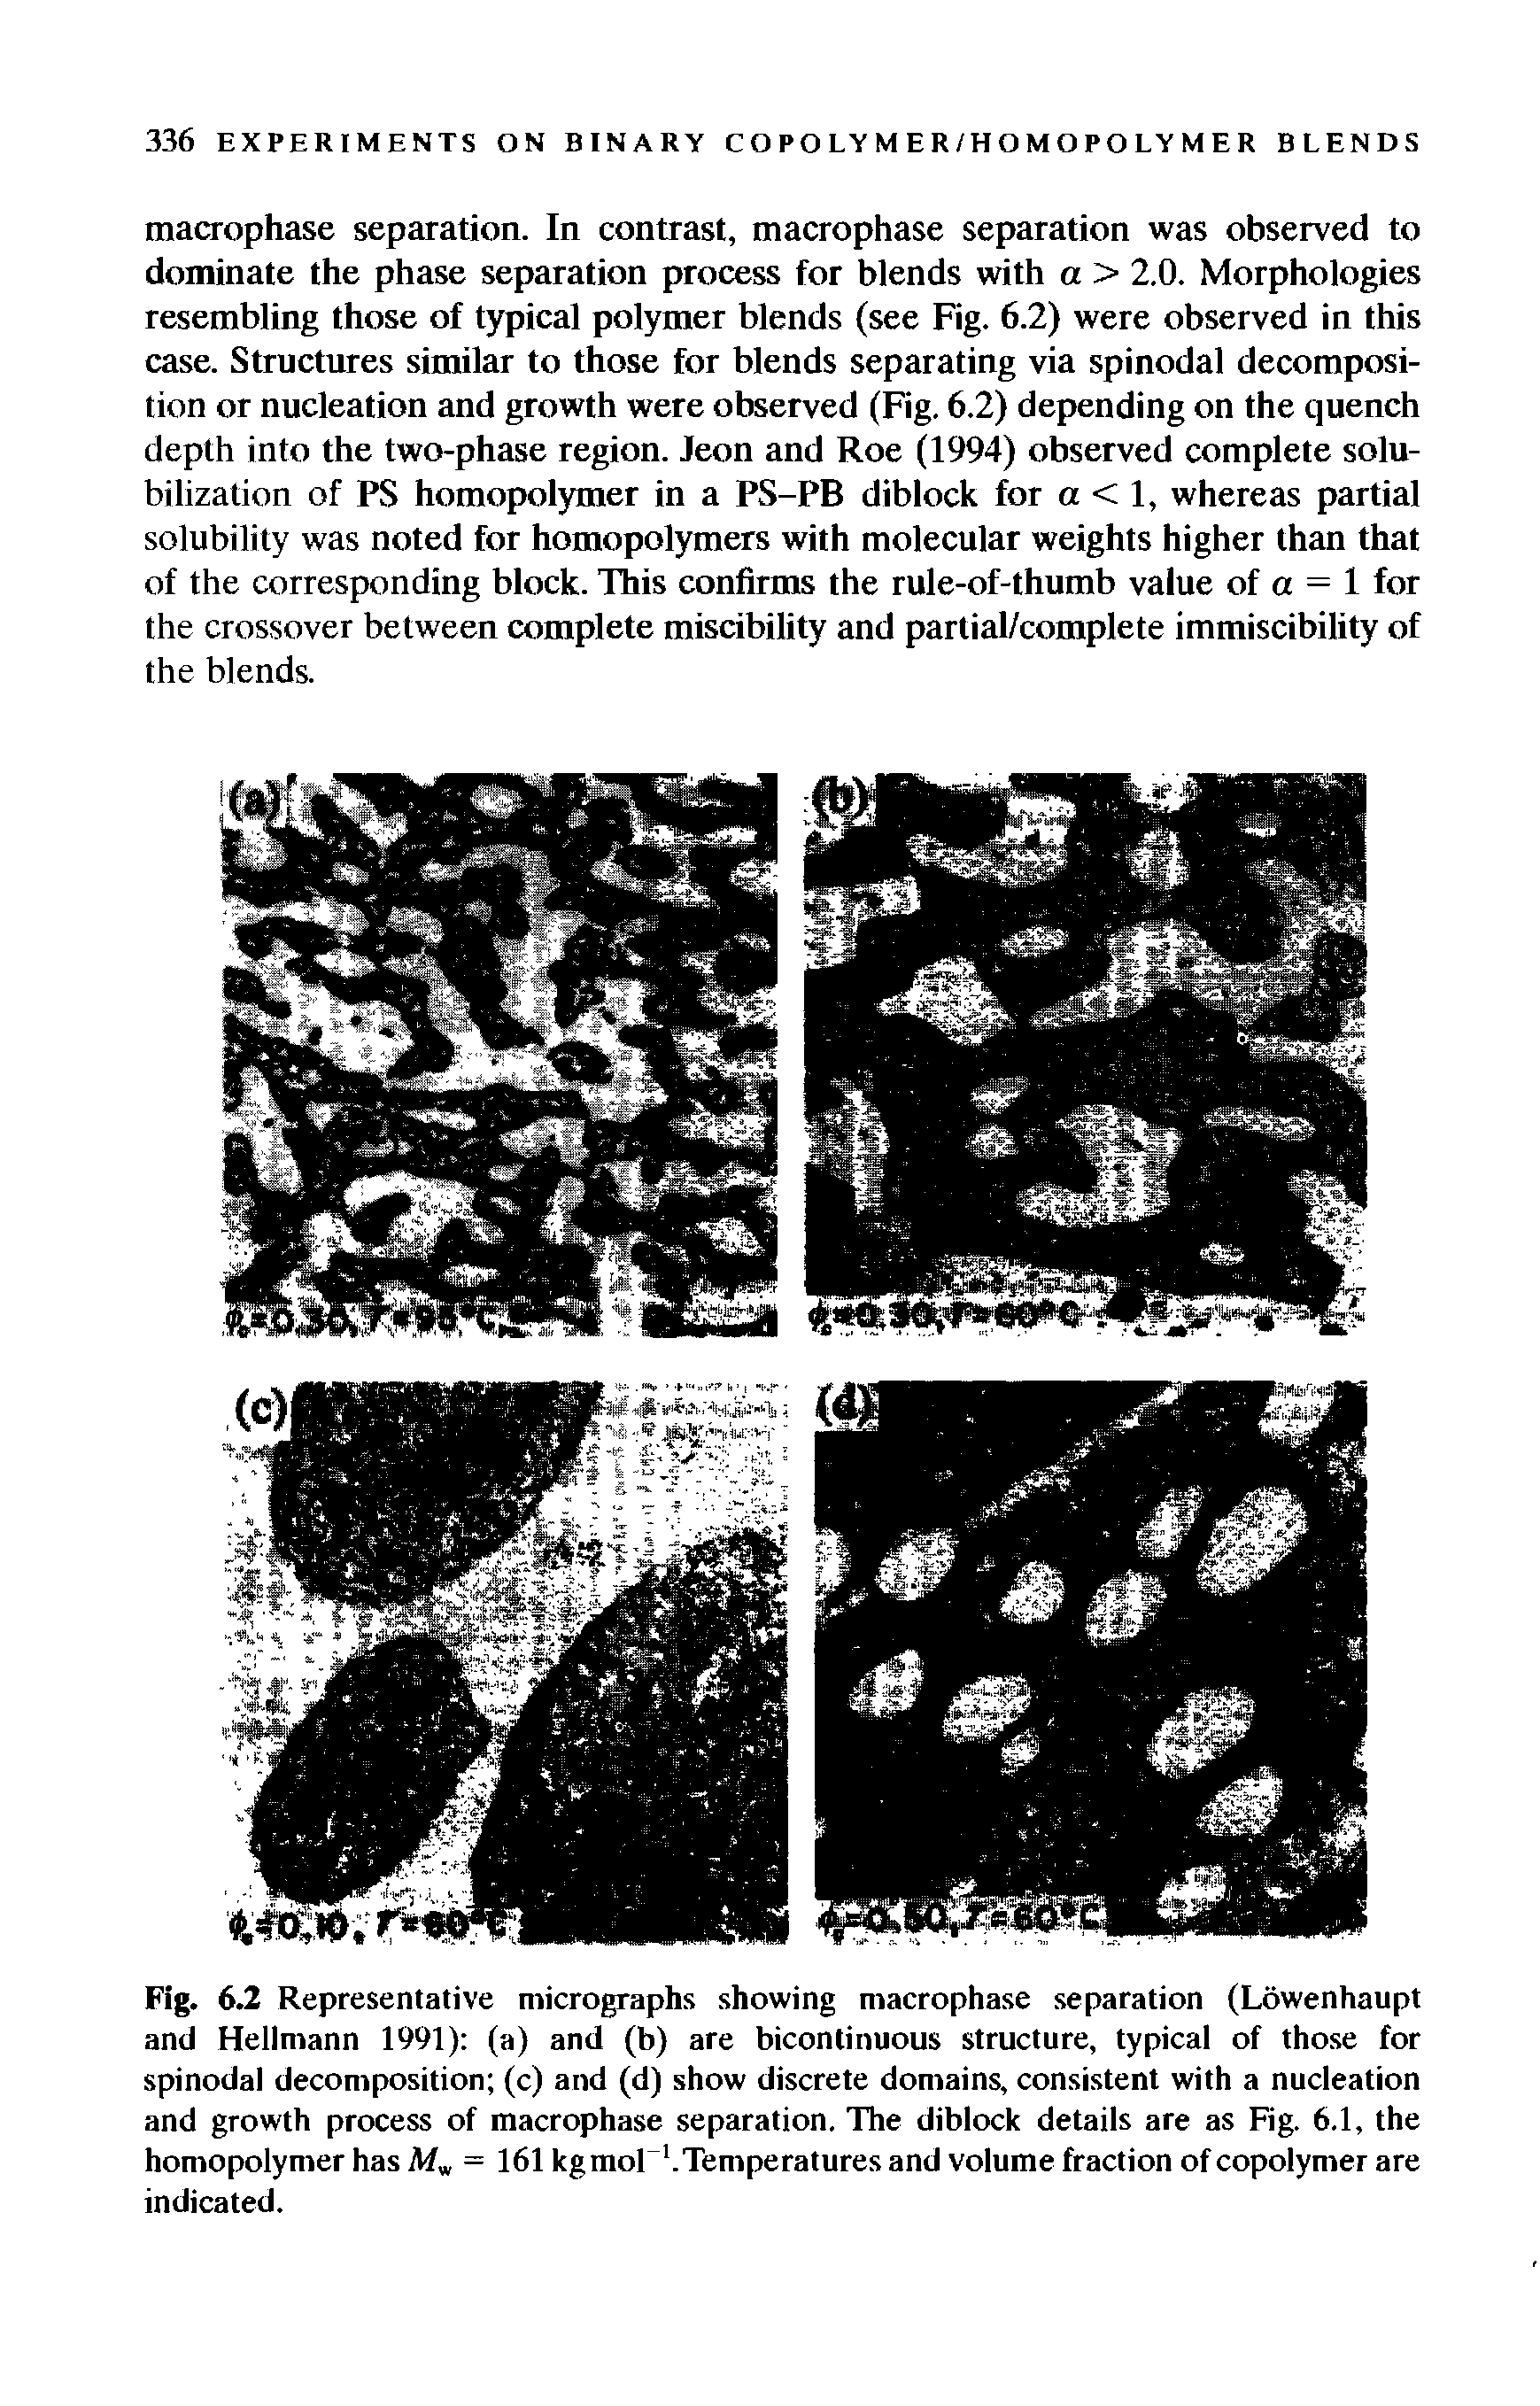 Fig. 6.2 Representative micrographs showing macrophase separation (Lowenhaupt and Hellmann 1991) (a) and (b) are bicontinuous structure, typical of those for spinodal decomposition (c) and (d) show discrete domains, consistent with a nucleation and growth process of macrophase separation. The diblock details are as Fig. 6.1, the homopolymer has A/w = 161 kg mol-1. Temperatures and volume fraction of copolymer are indicated.